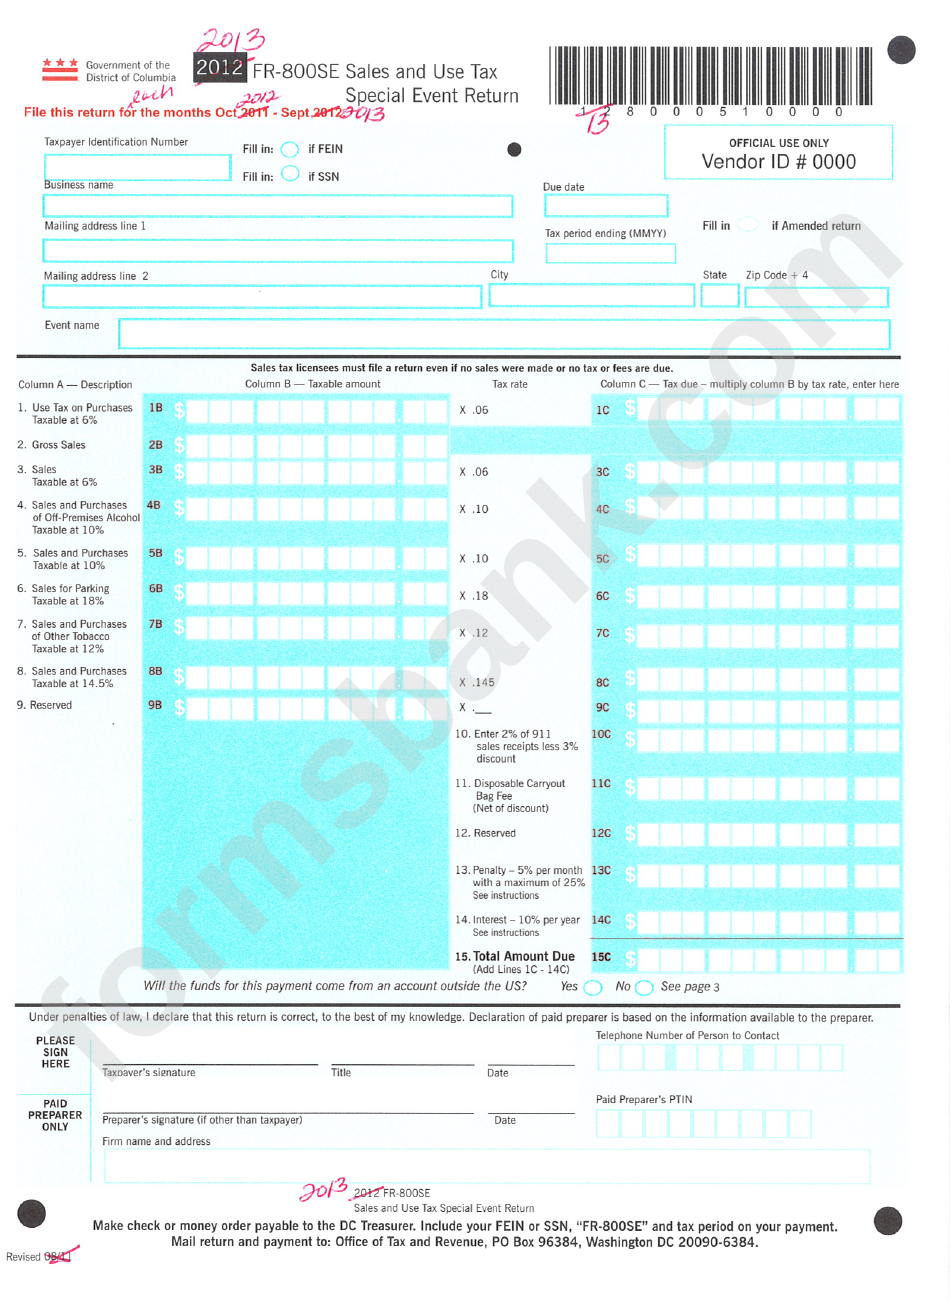 Form Fr-800se Draft - Sales And Use Tax Special Event Return - 2013